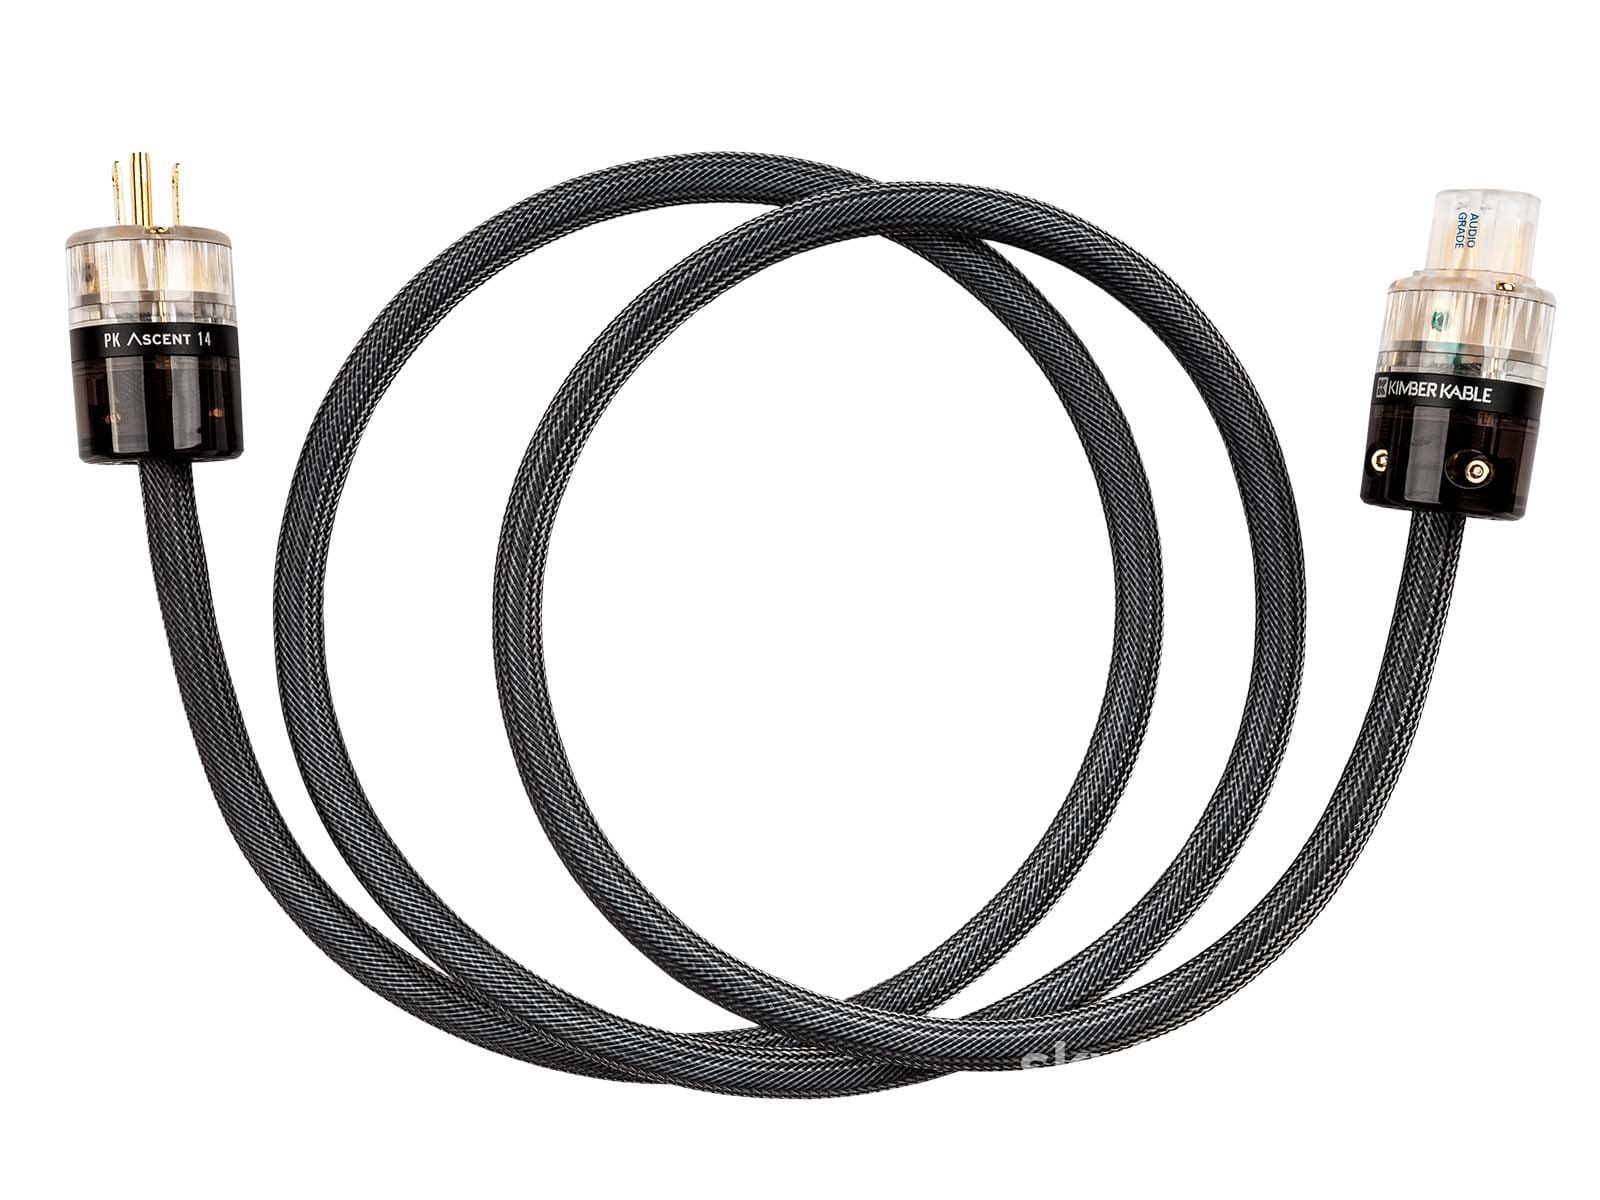 Kimber Kable - Ascent Series Pk14 Power Cord New Cables